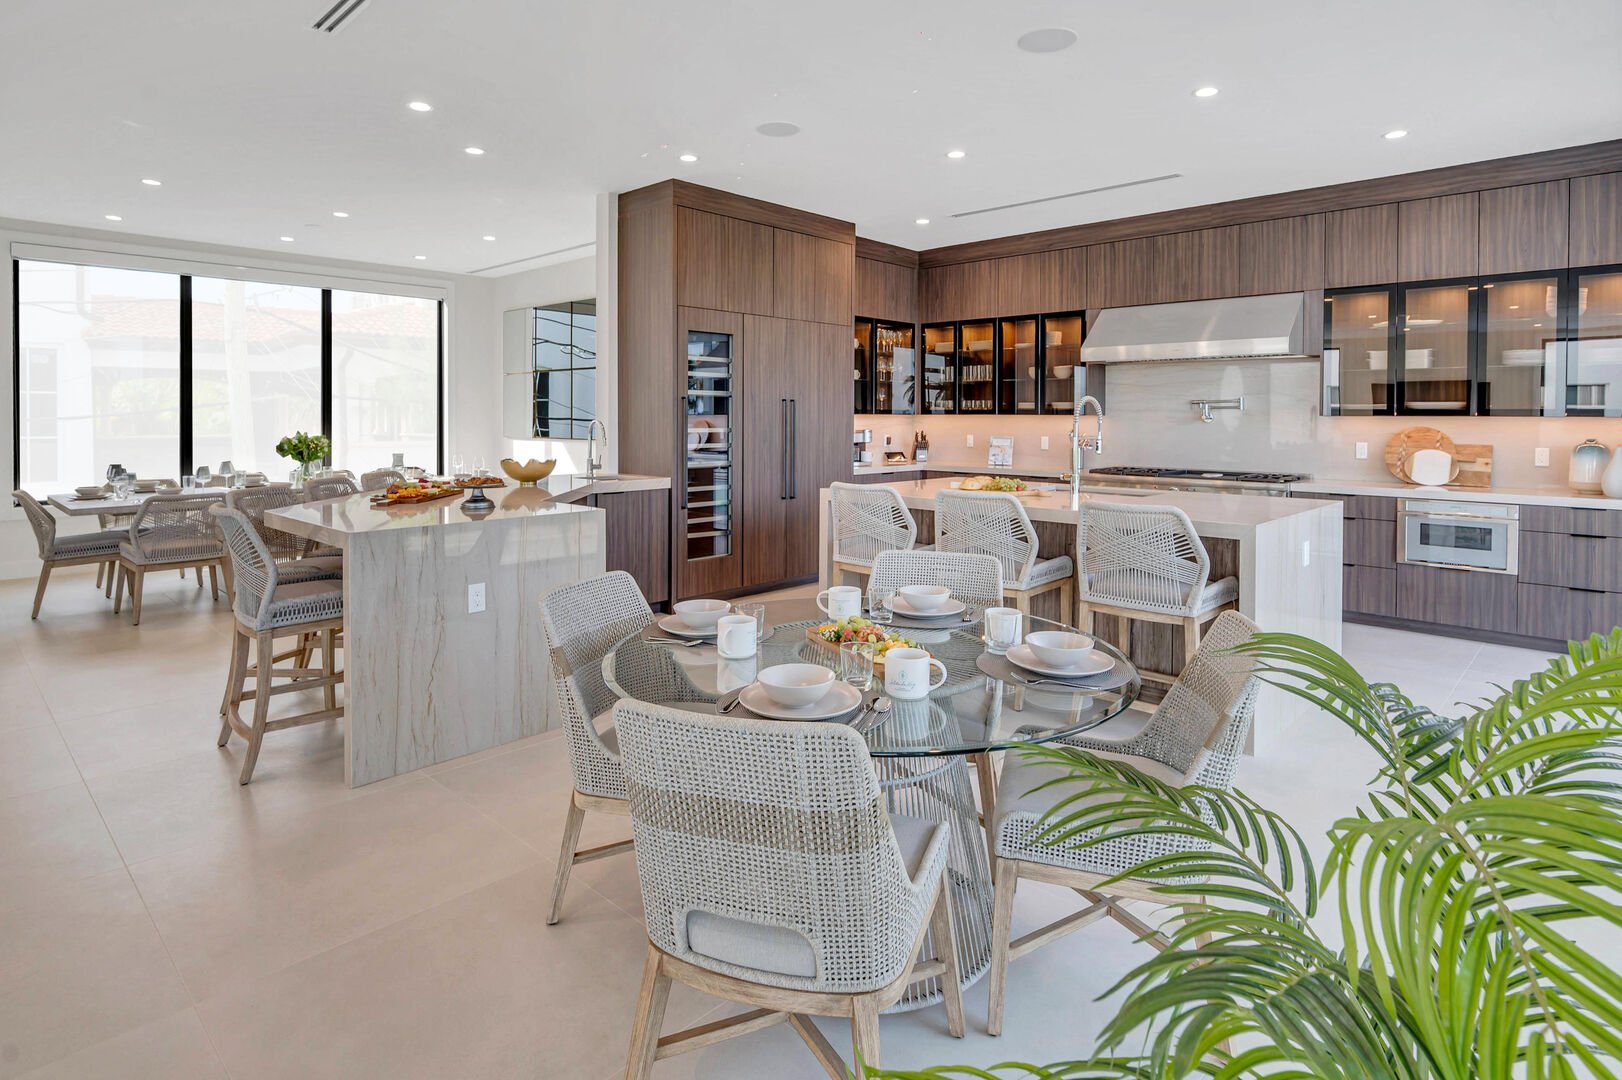 Chef's kitchen, a wet bar and breakfast nook featuring Ocean Views.